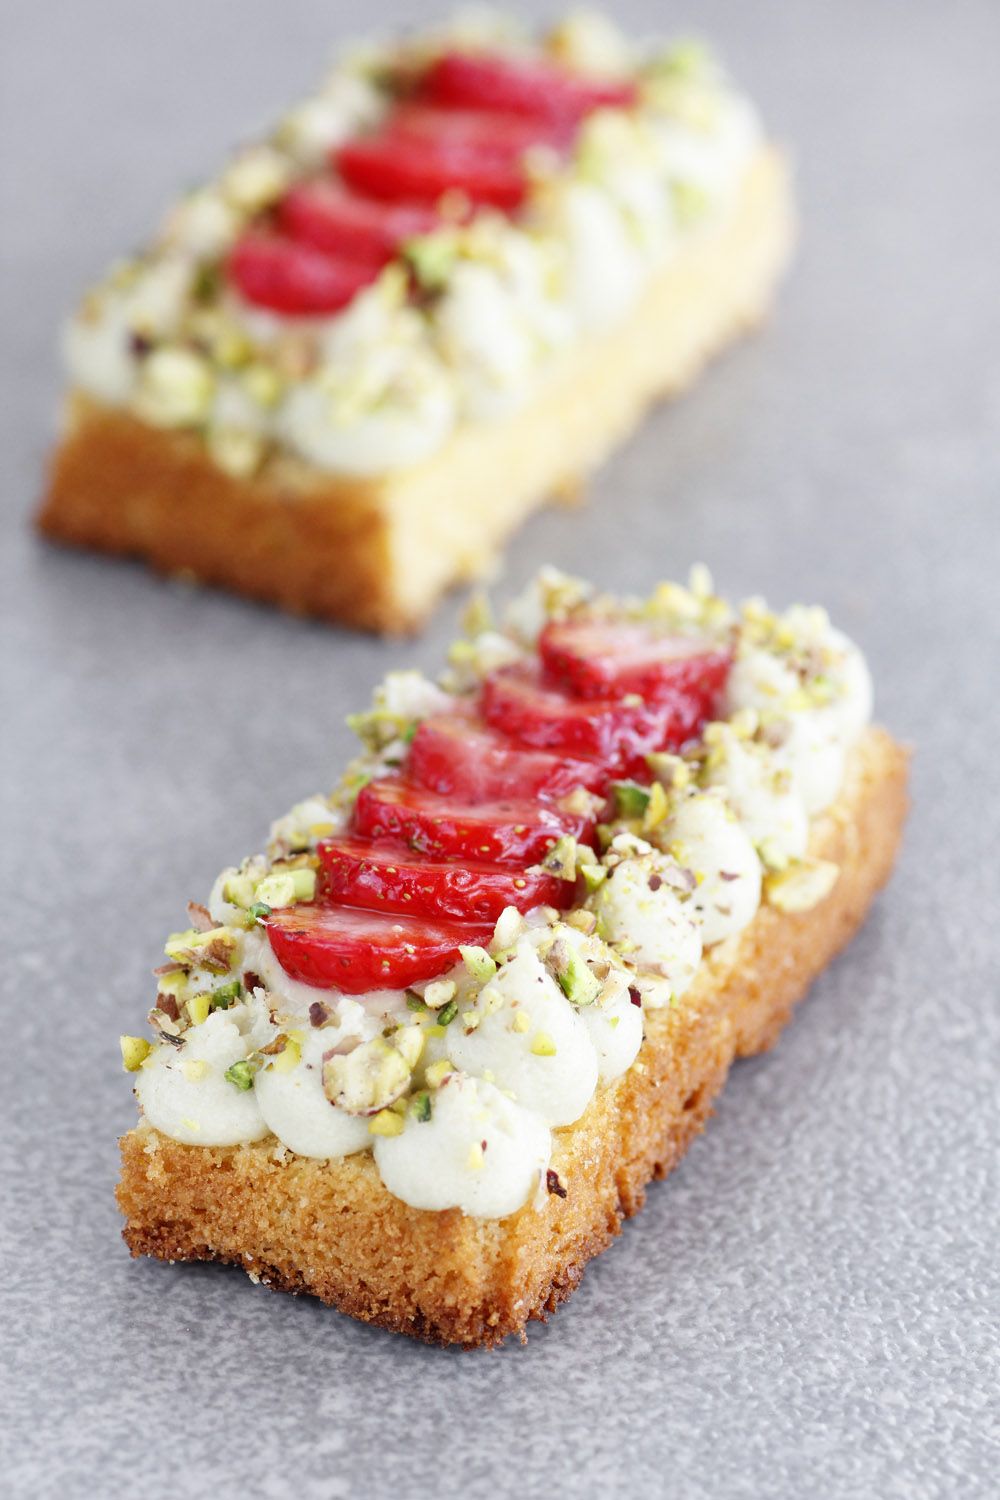 Strawberry Cake with Passion fruit and Pistachio Cream